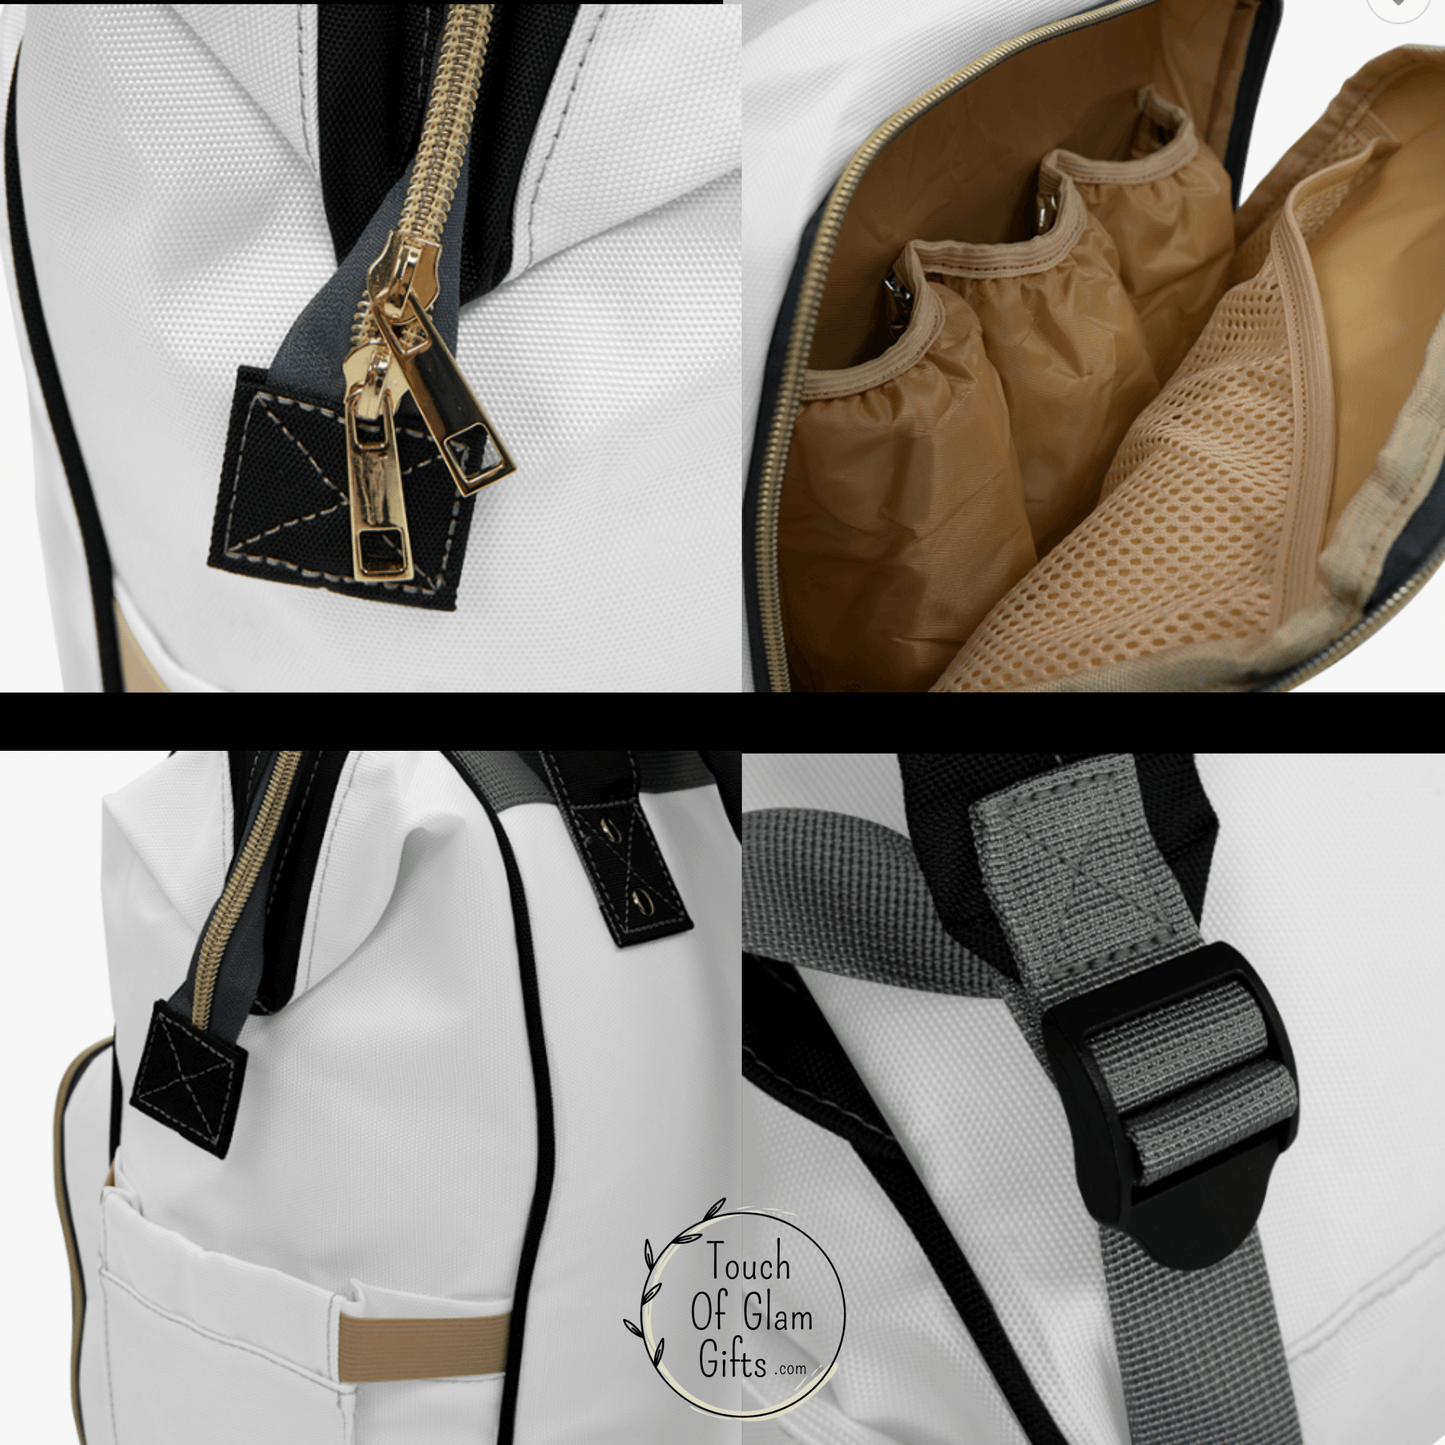 Up close view of gold color zipper, the inside of the exterior zipper pocket and the grey adjustable straps for padded shoulder straps.